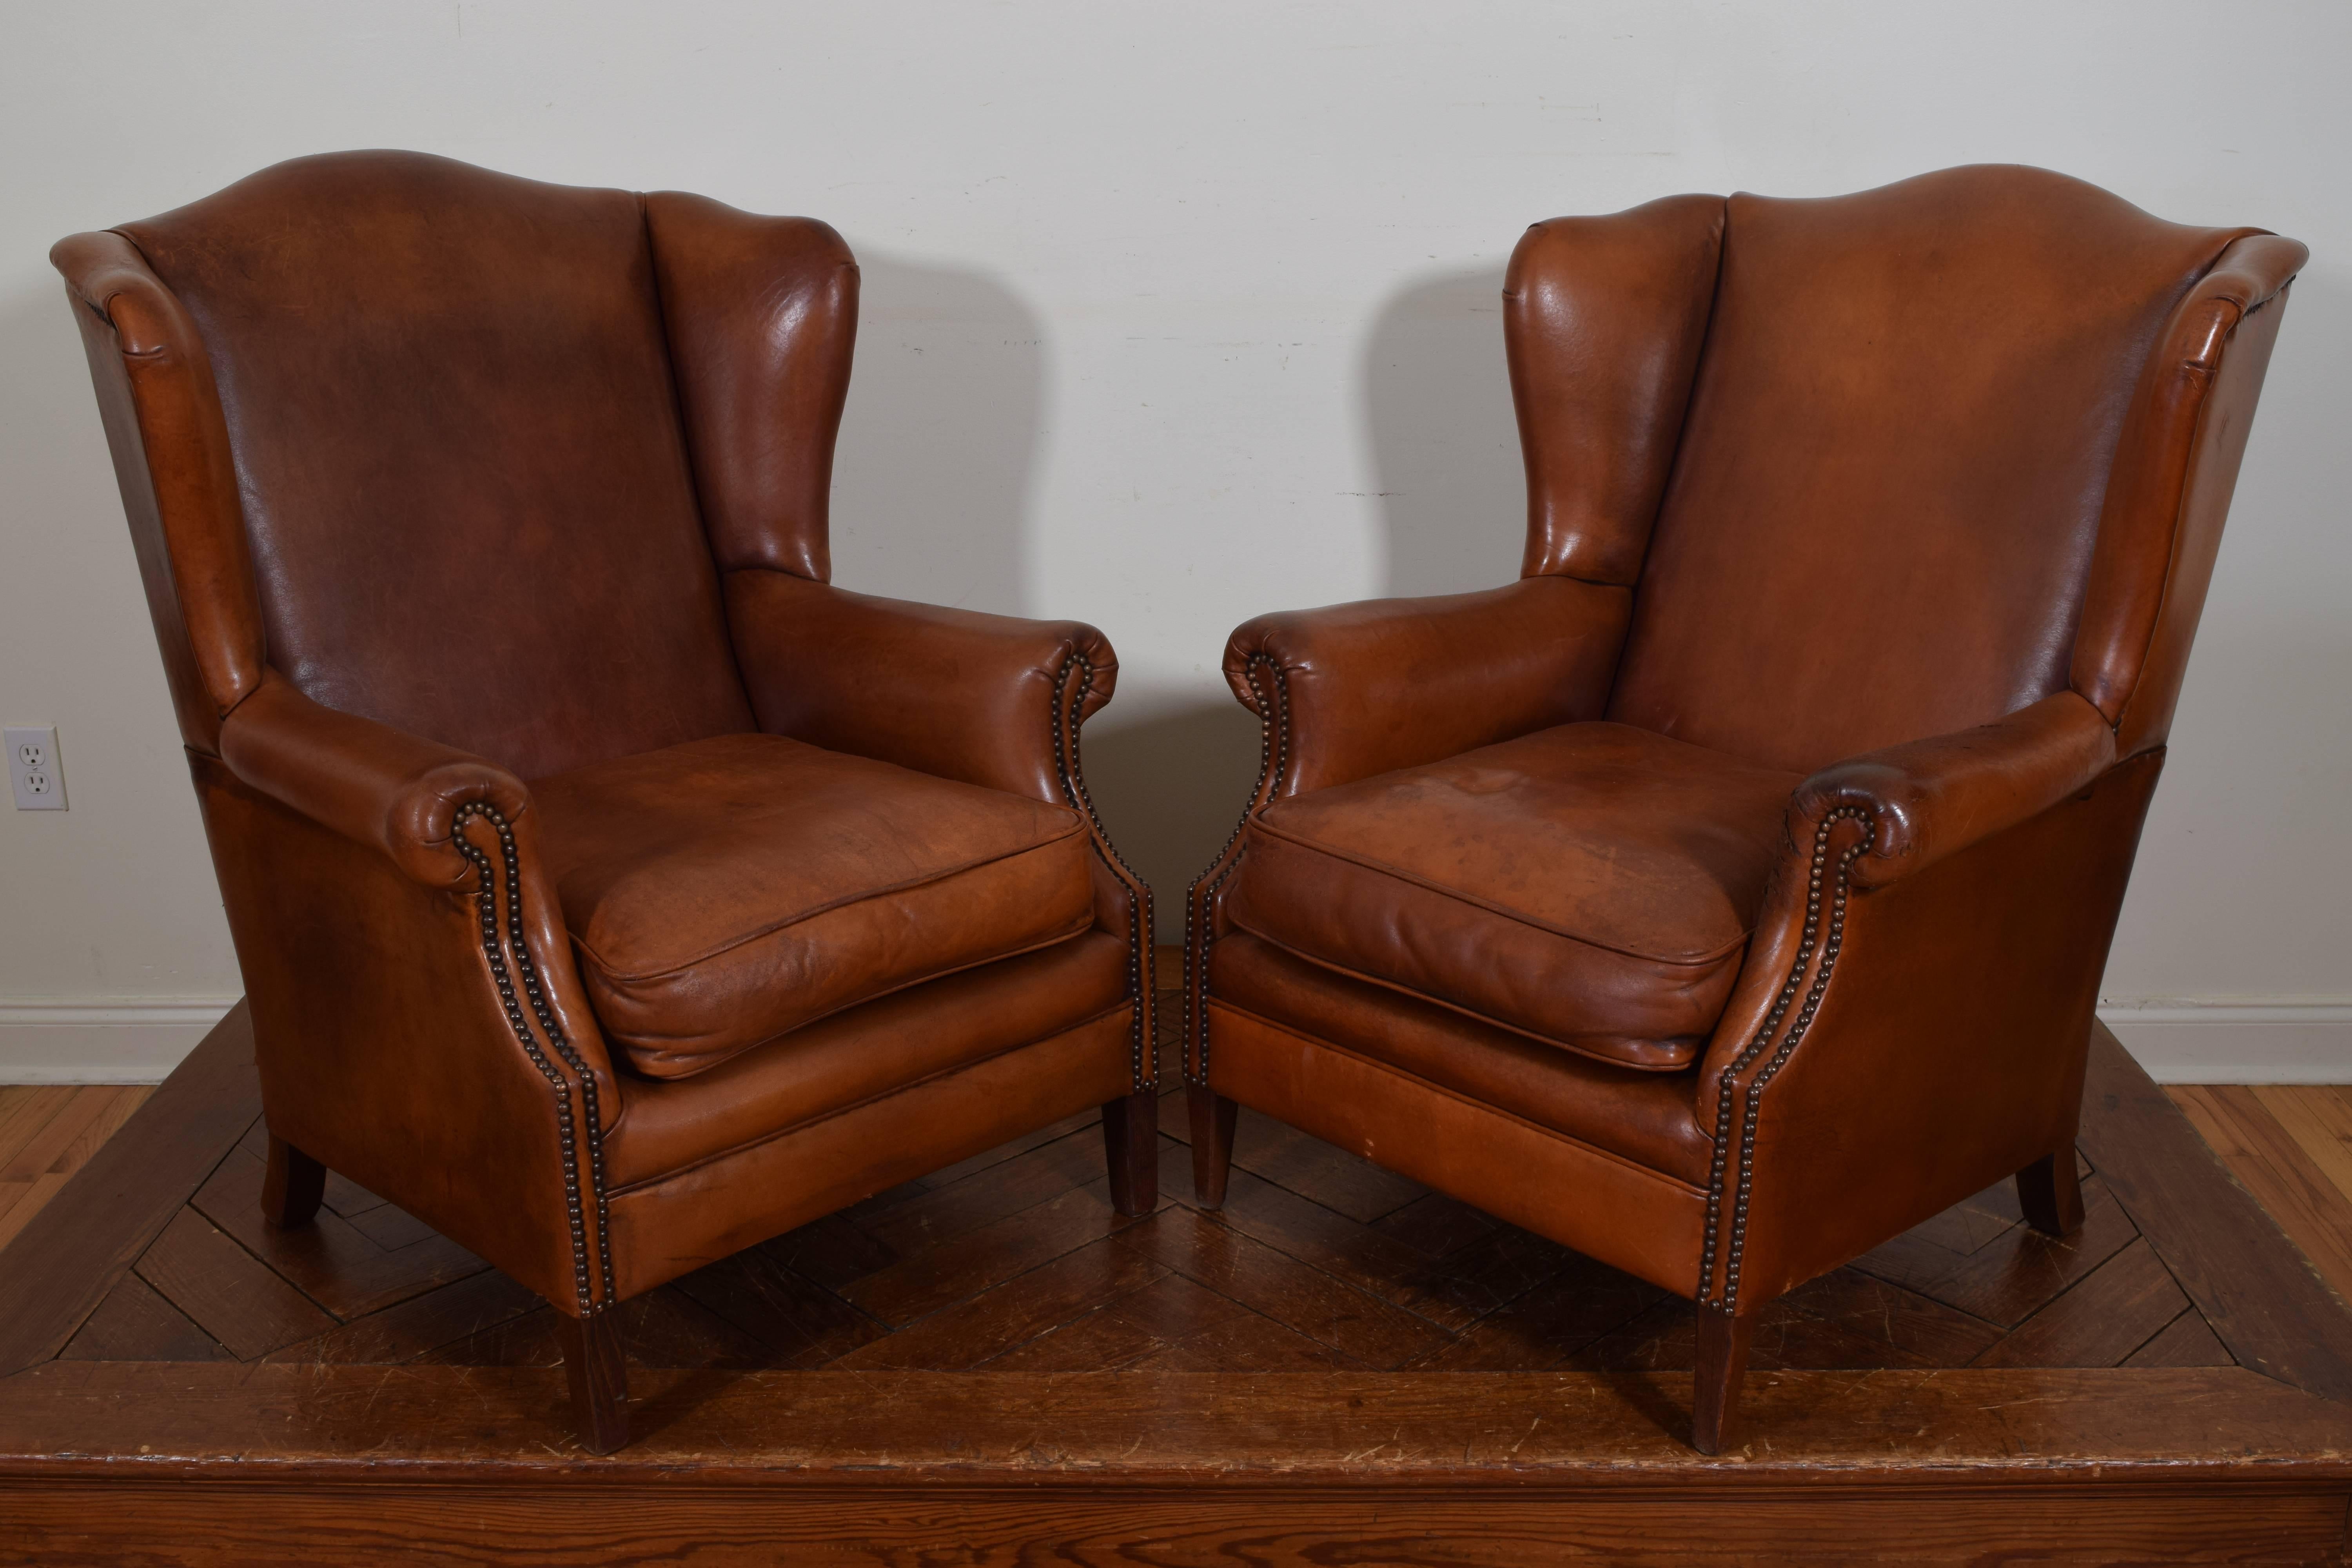 The pair having arched backrest and enclosed shaped wing sides, trimmed entirely in patinated brass nailheads, having loose cushions, raised on slightly different feet, one chair having front feet more tapered.